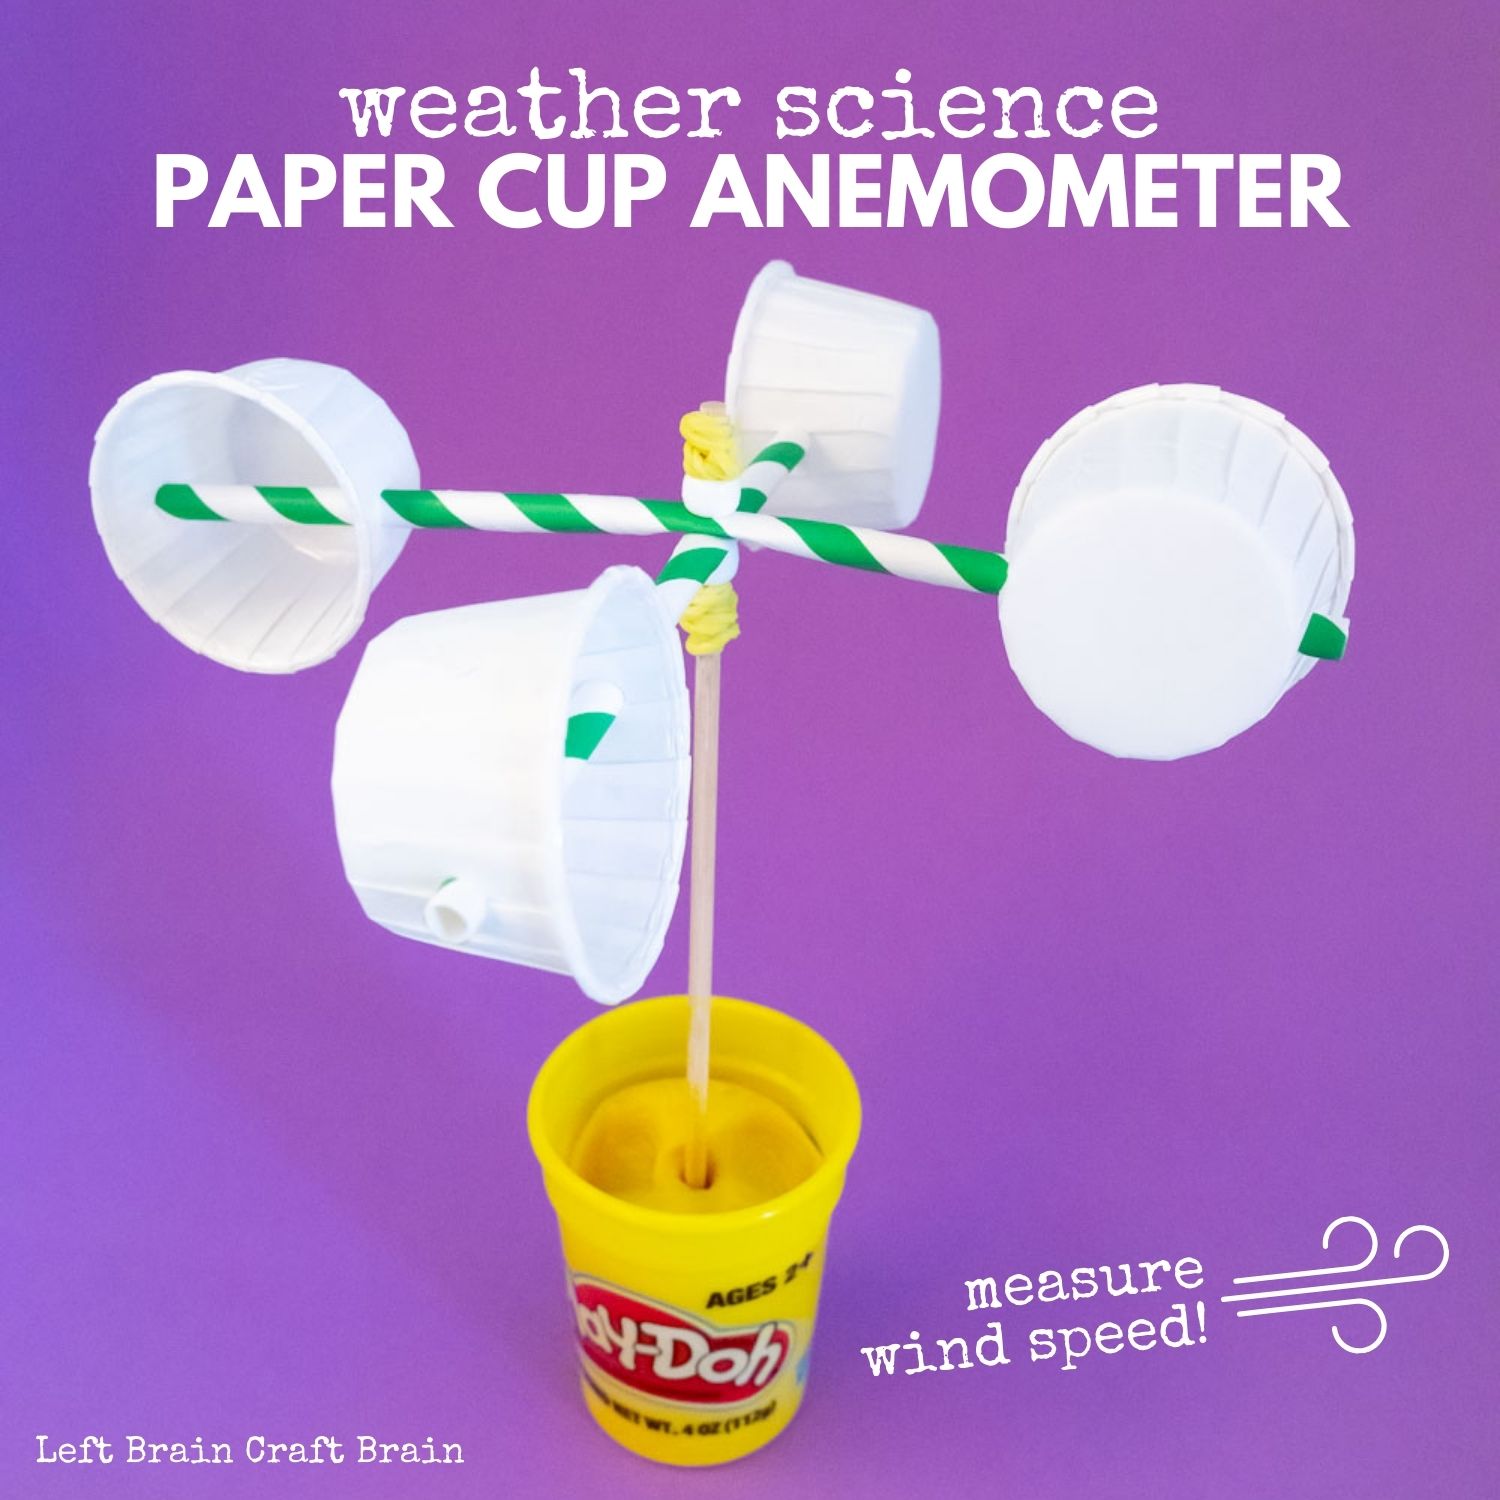 Measure the wind around you by building an anemometer from paper cups and straws. It's a fun science fair or STEM project for kids.